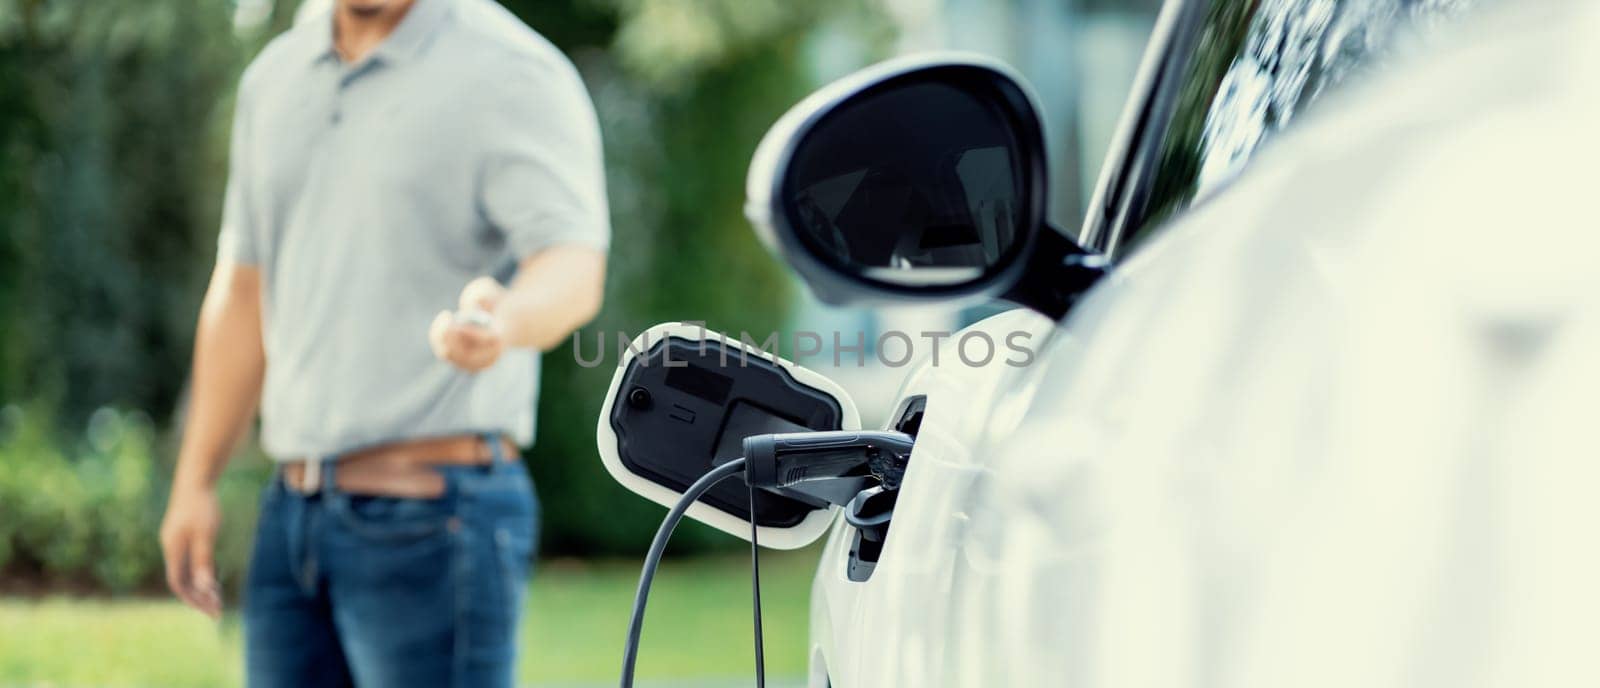 Focus recharging electric vehicle outdoor from charging station with blurred background of man at EV car. Concept ideal for new progressive technology of green and renewable energy for car.